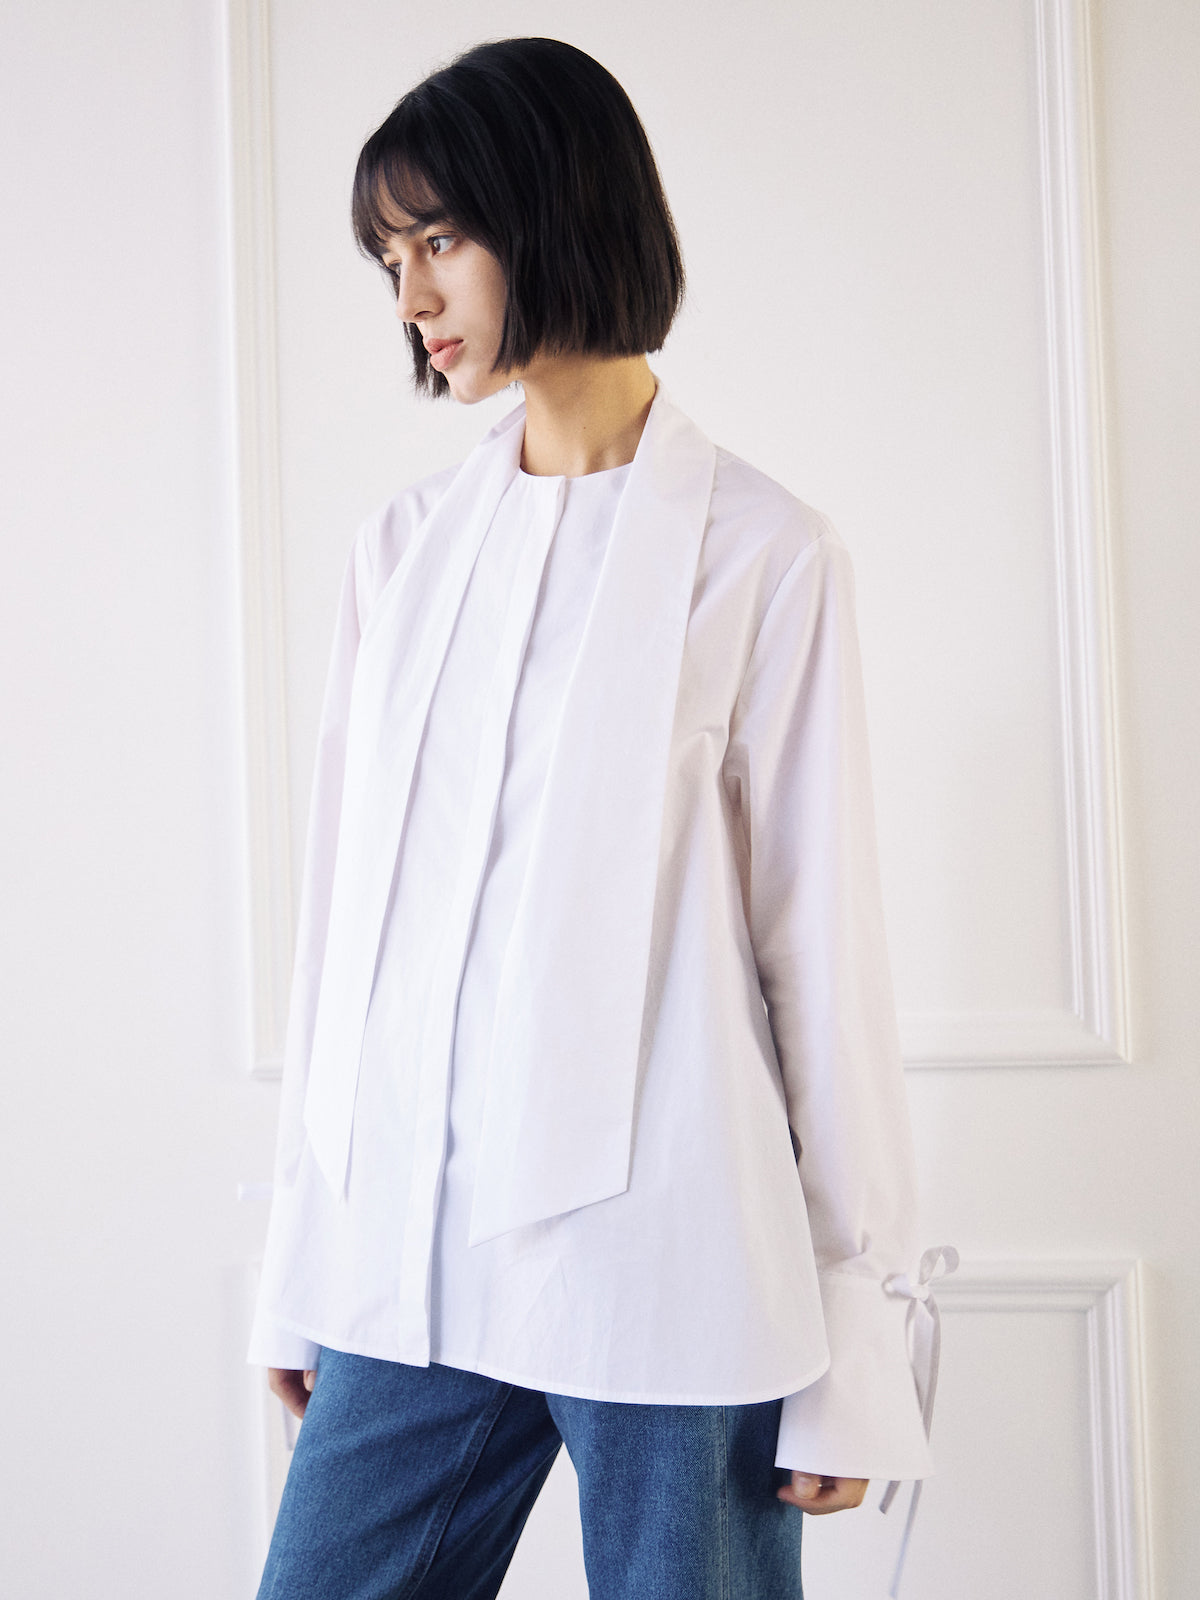 A-Line Scarf Blouse In White